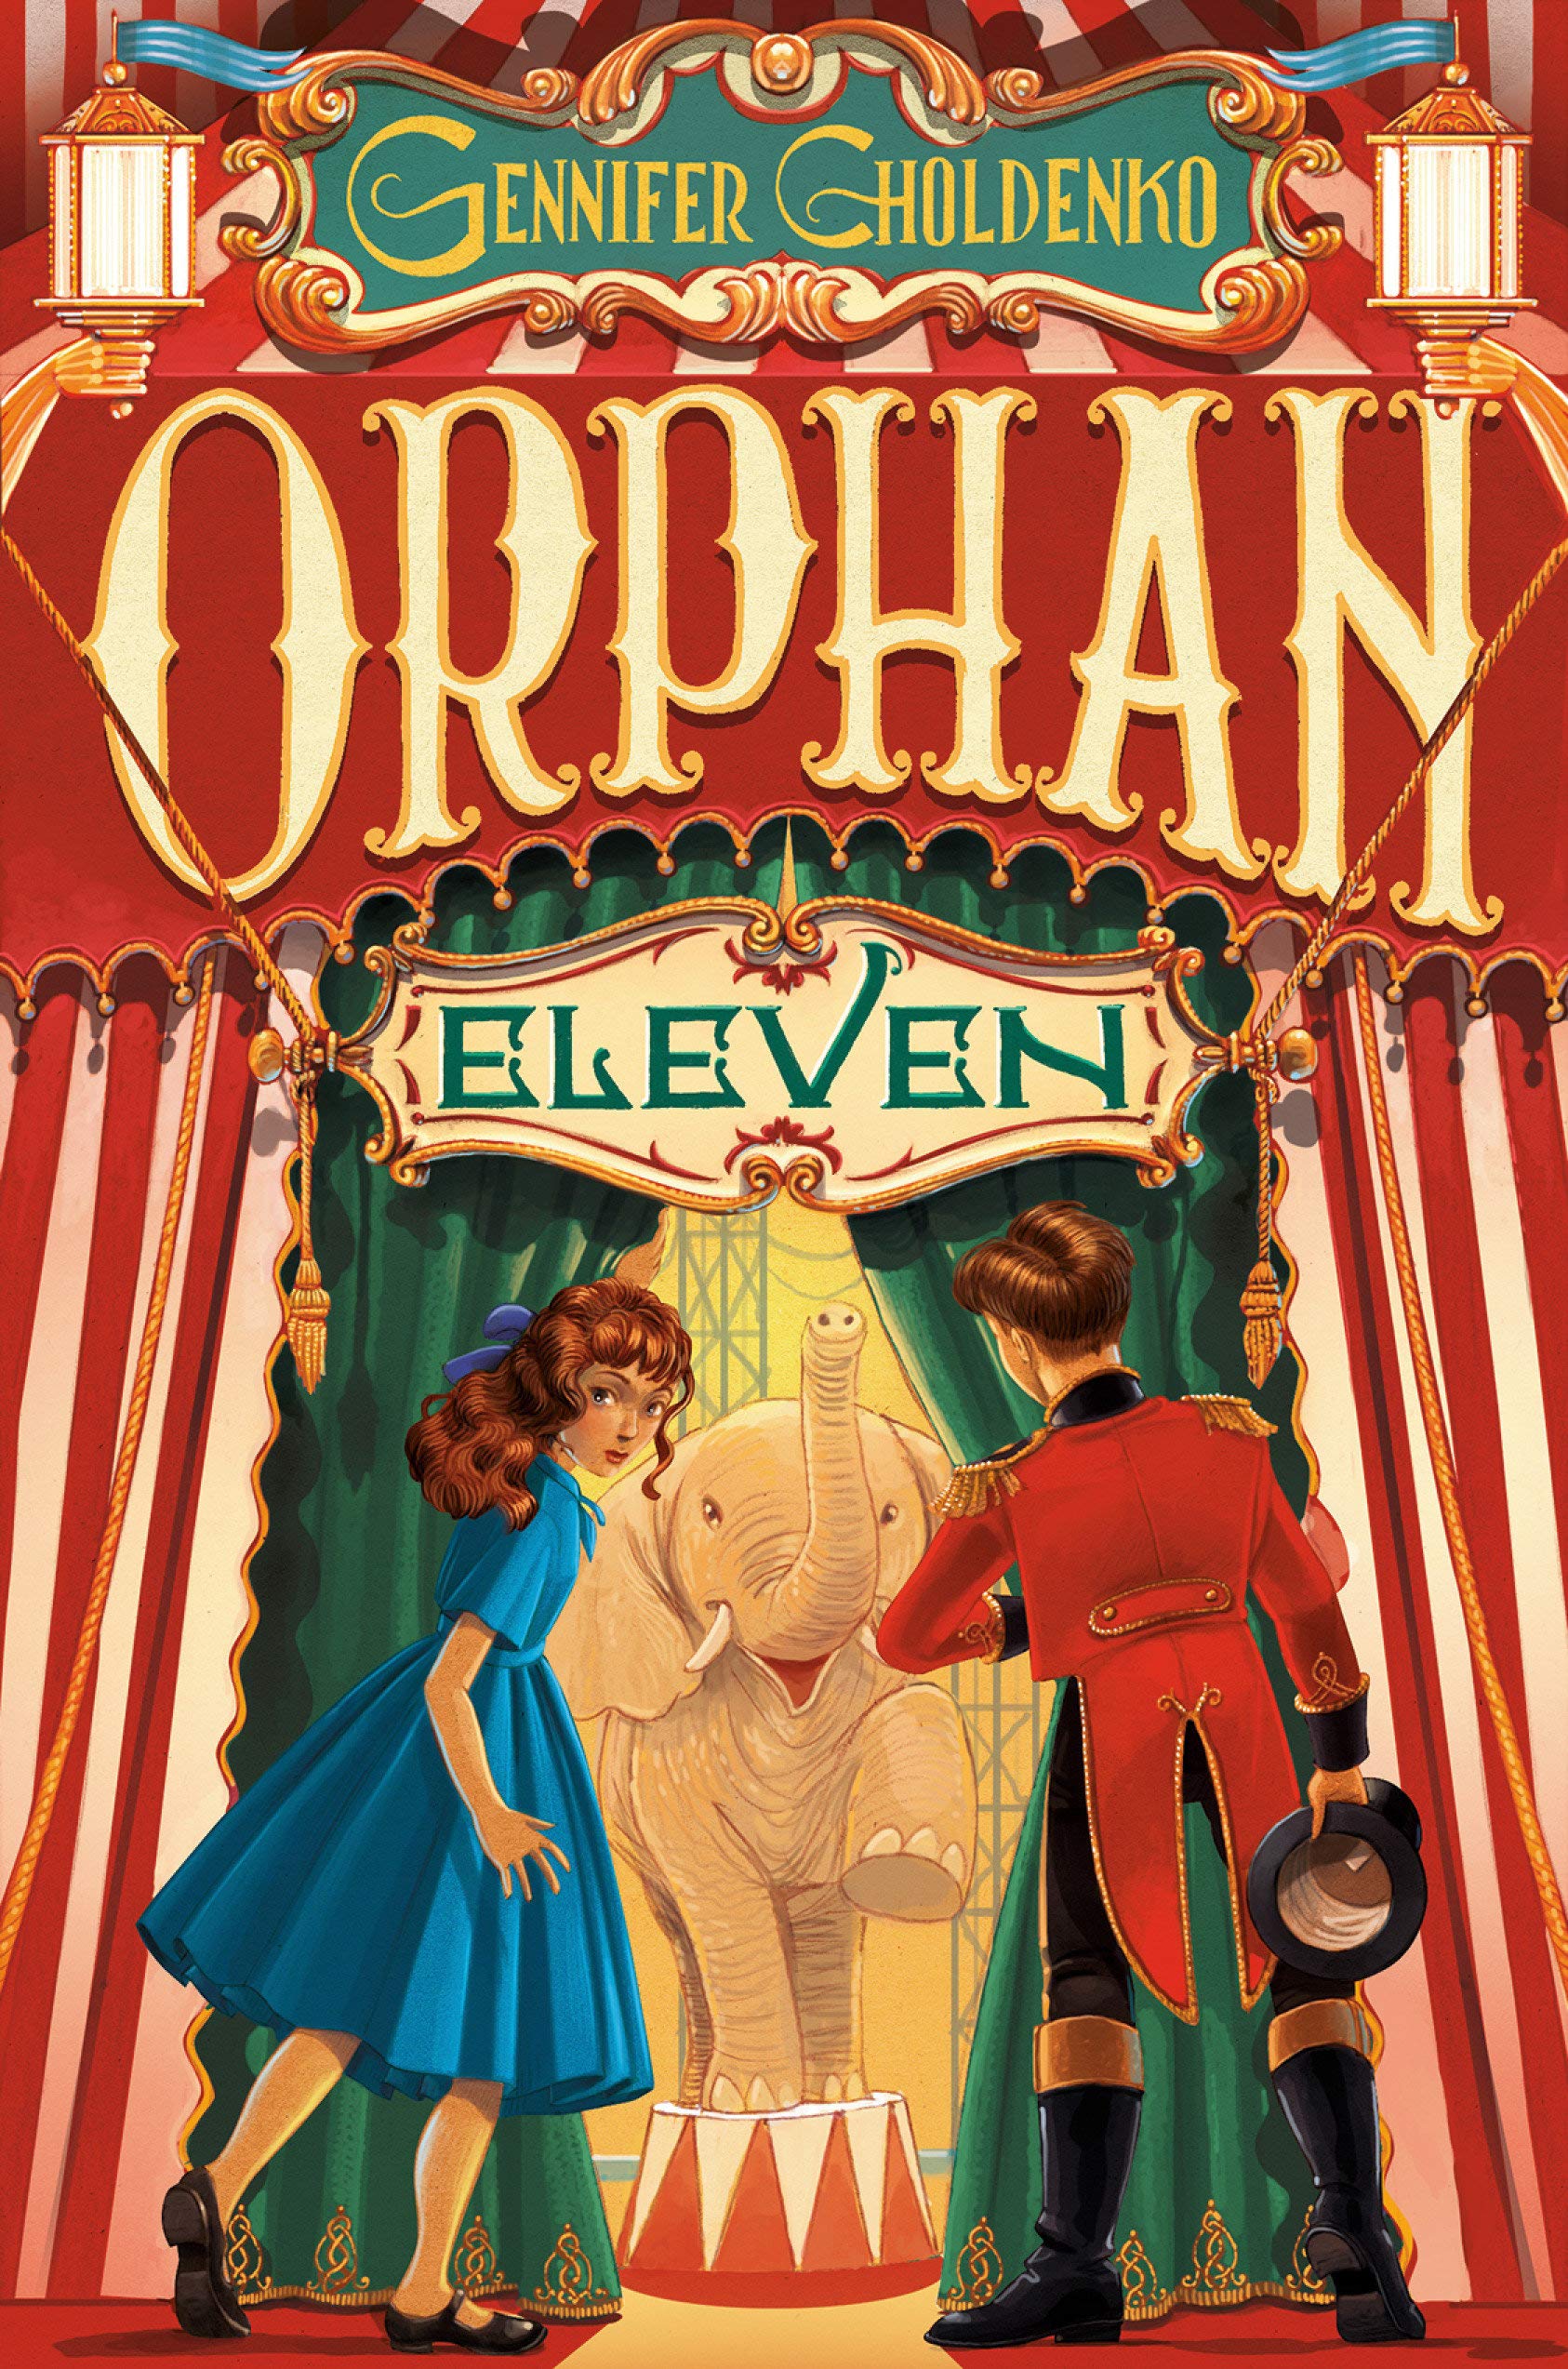 Read more about the article Orphan Eleven by Gennifer Choldenko